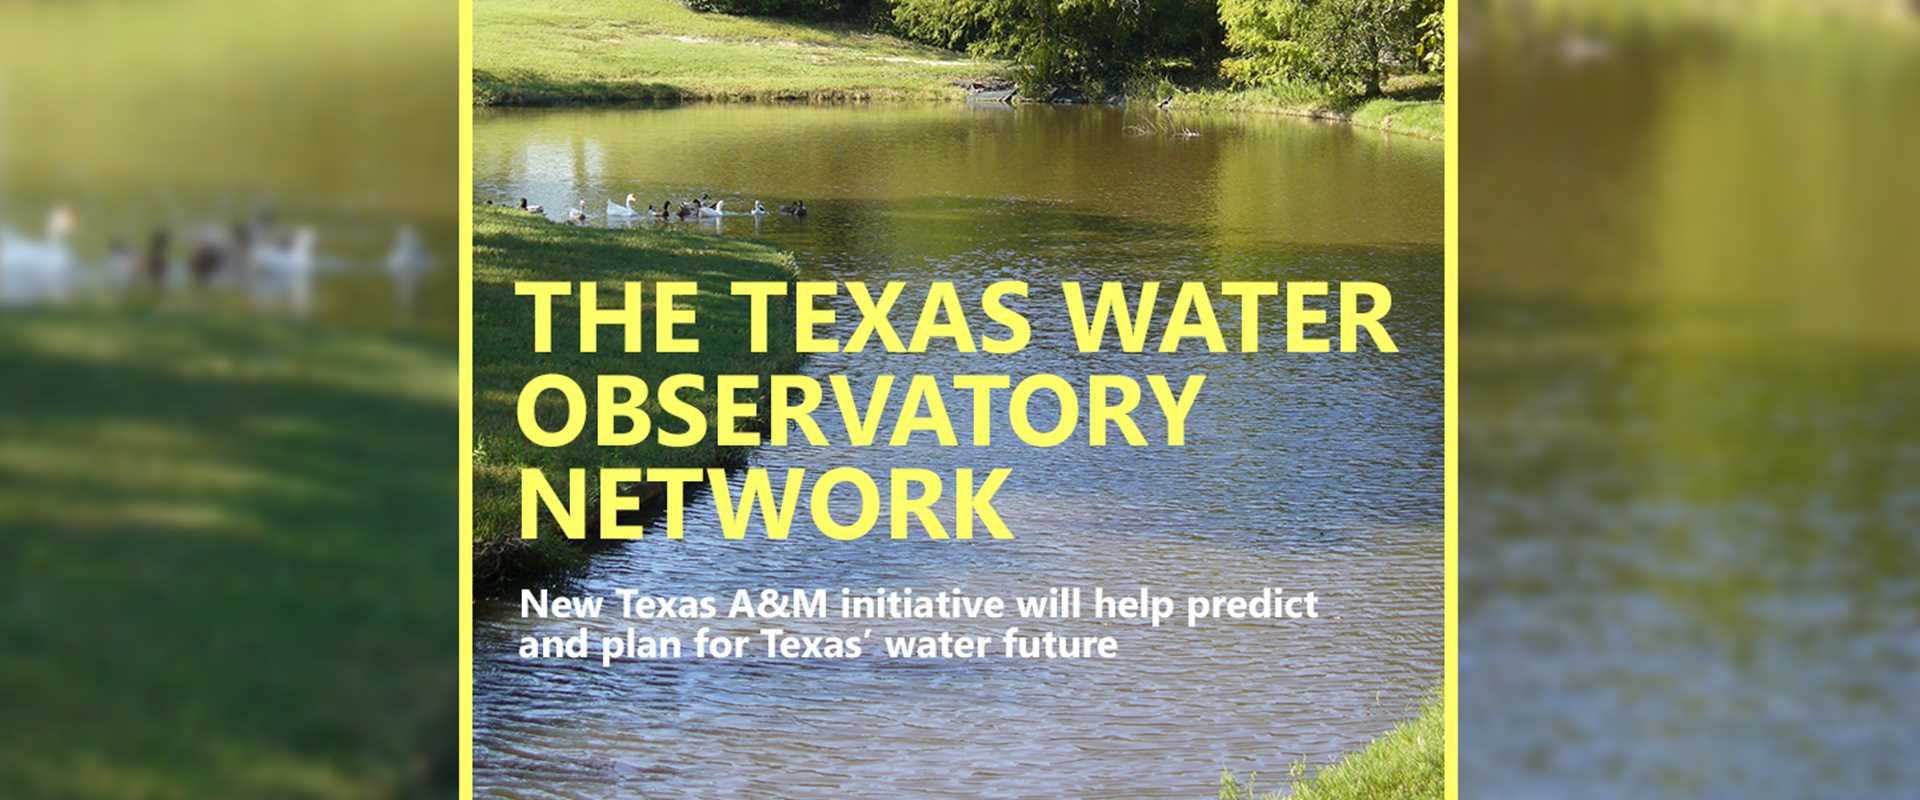 The Texas Water Observatory Network